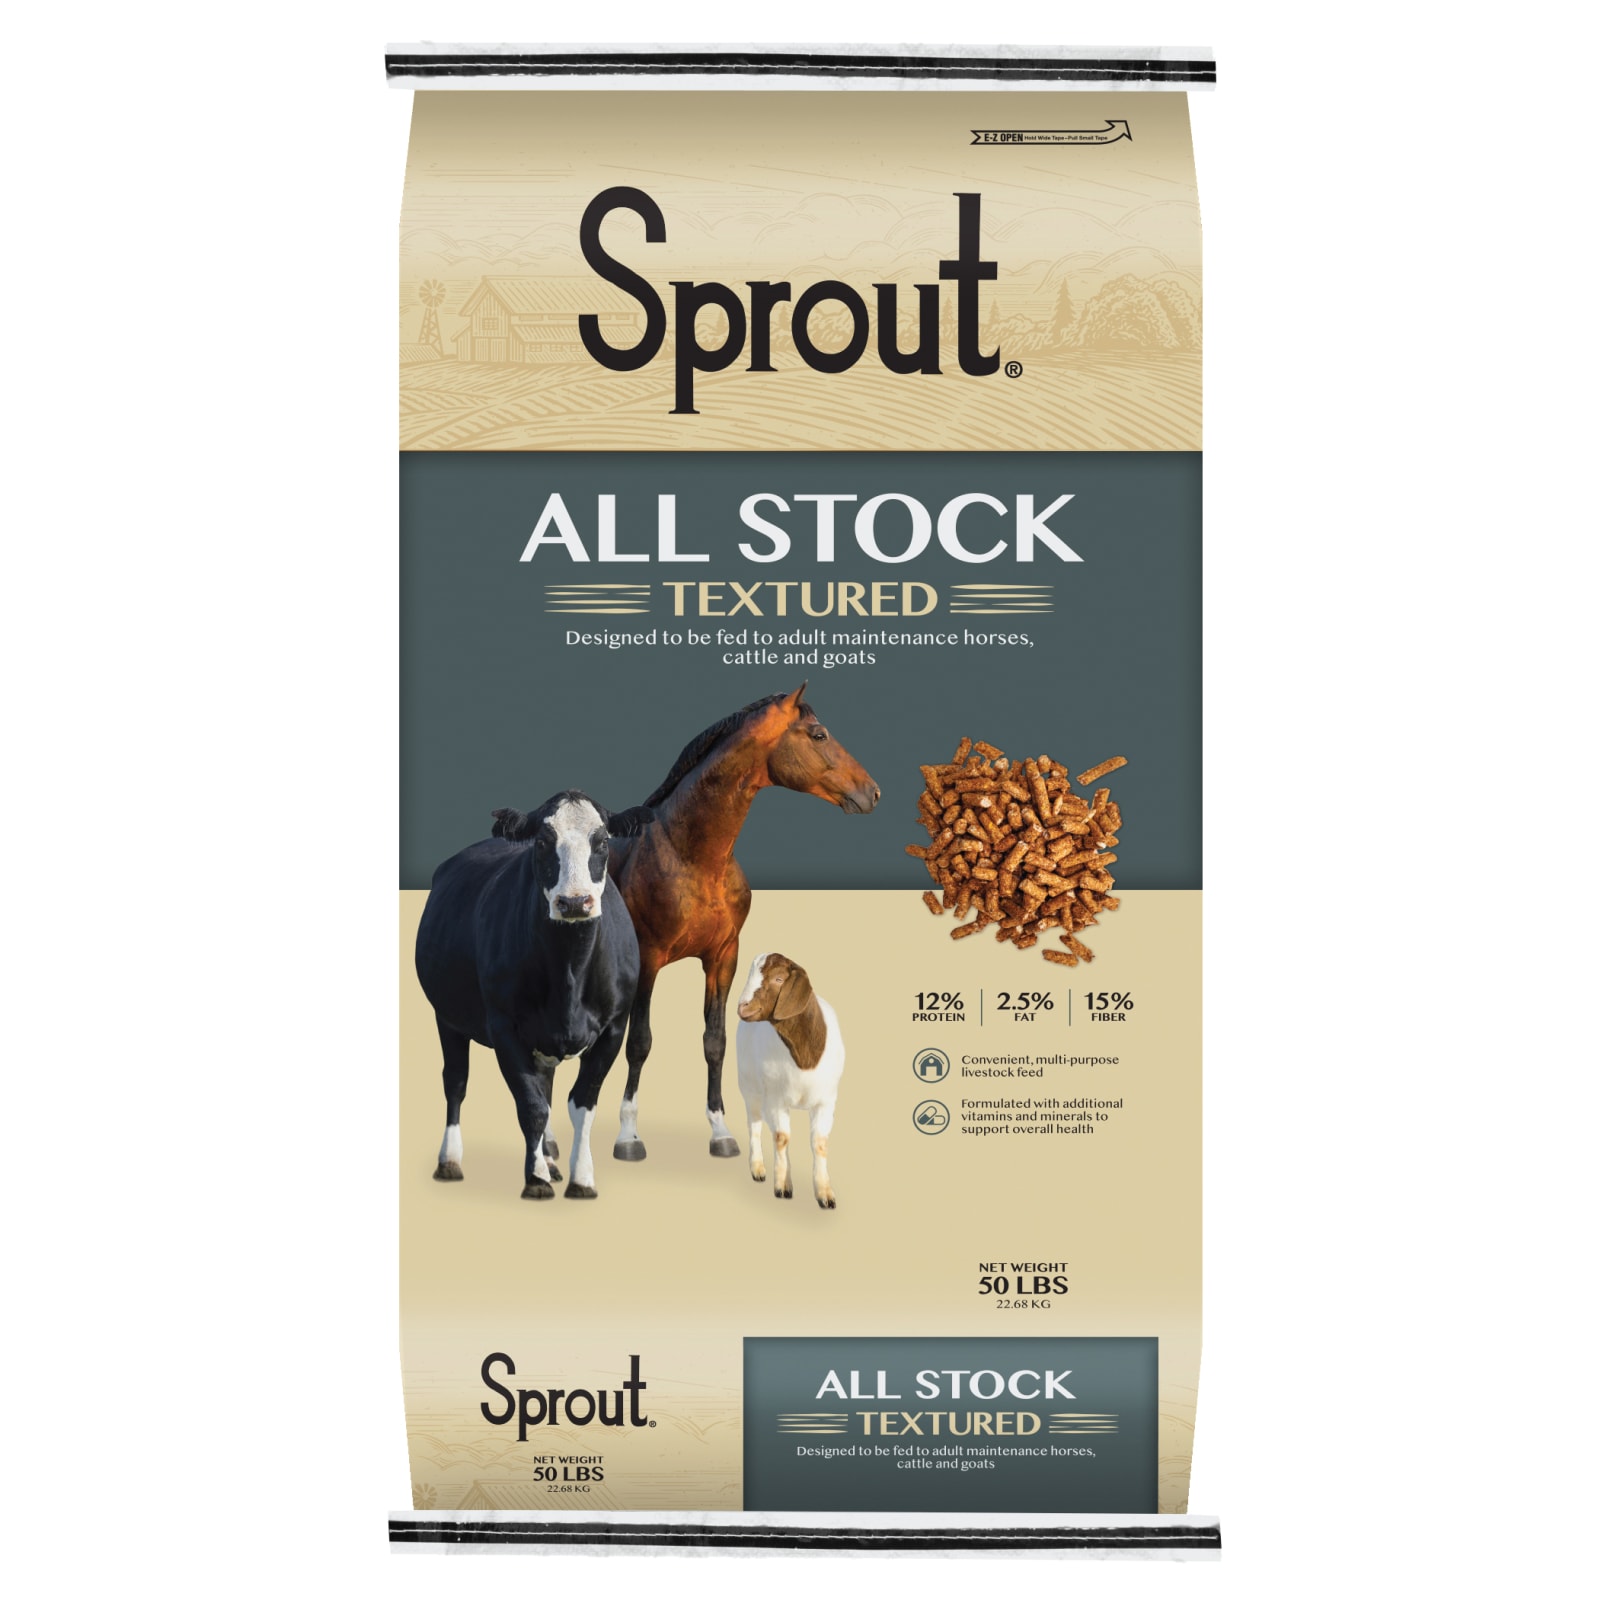 All Stock Textured Feed - 50 lb by Sprout at Fleet Farm